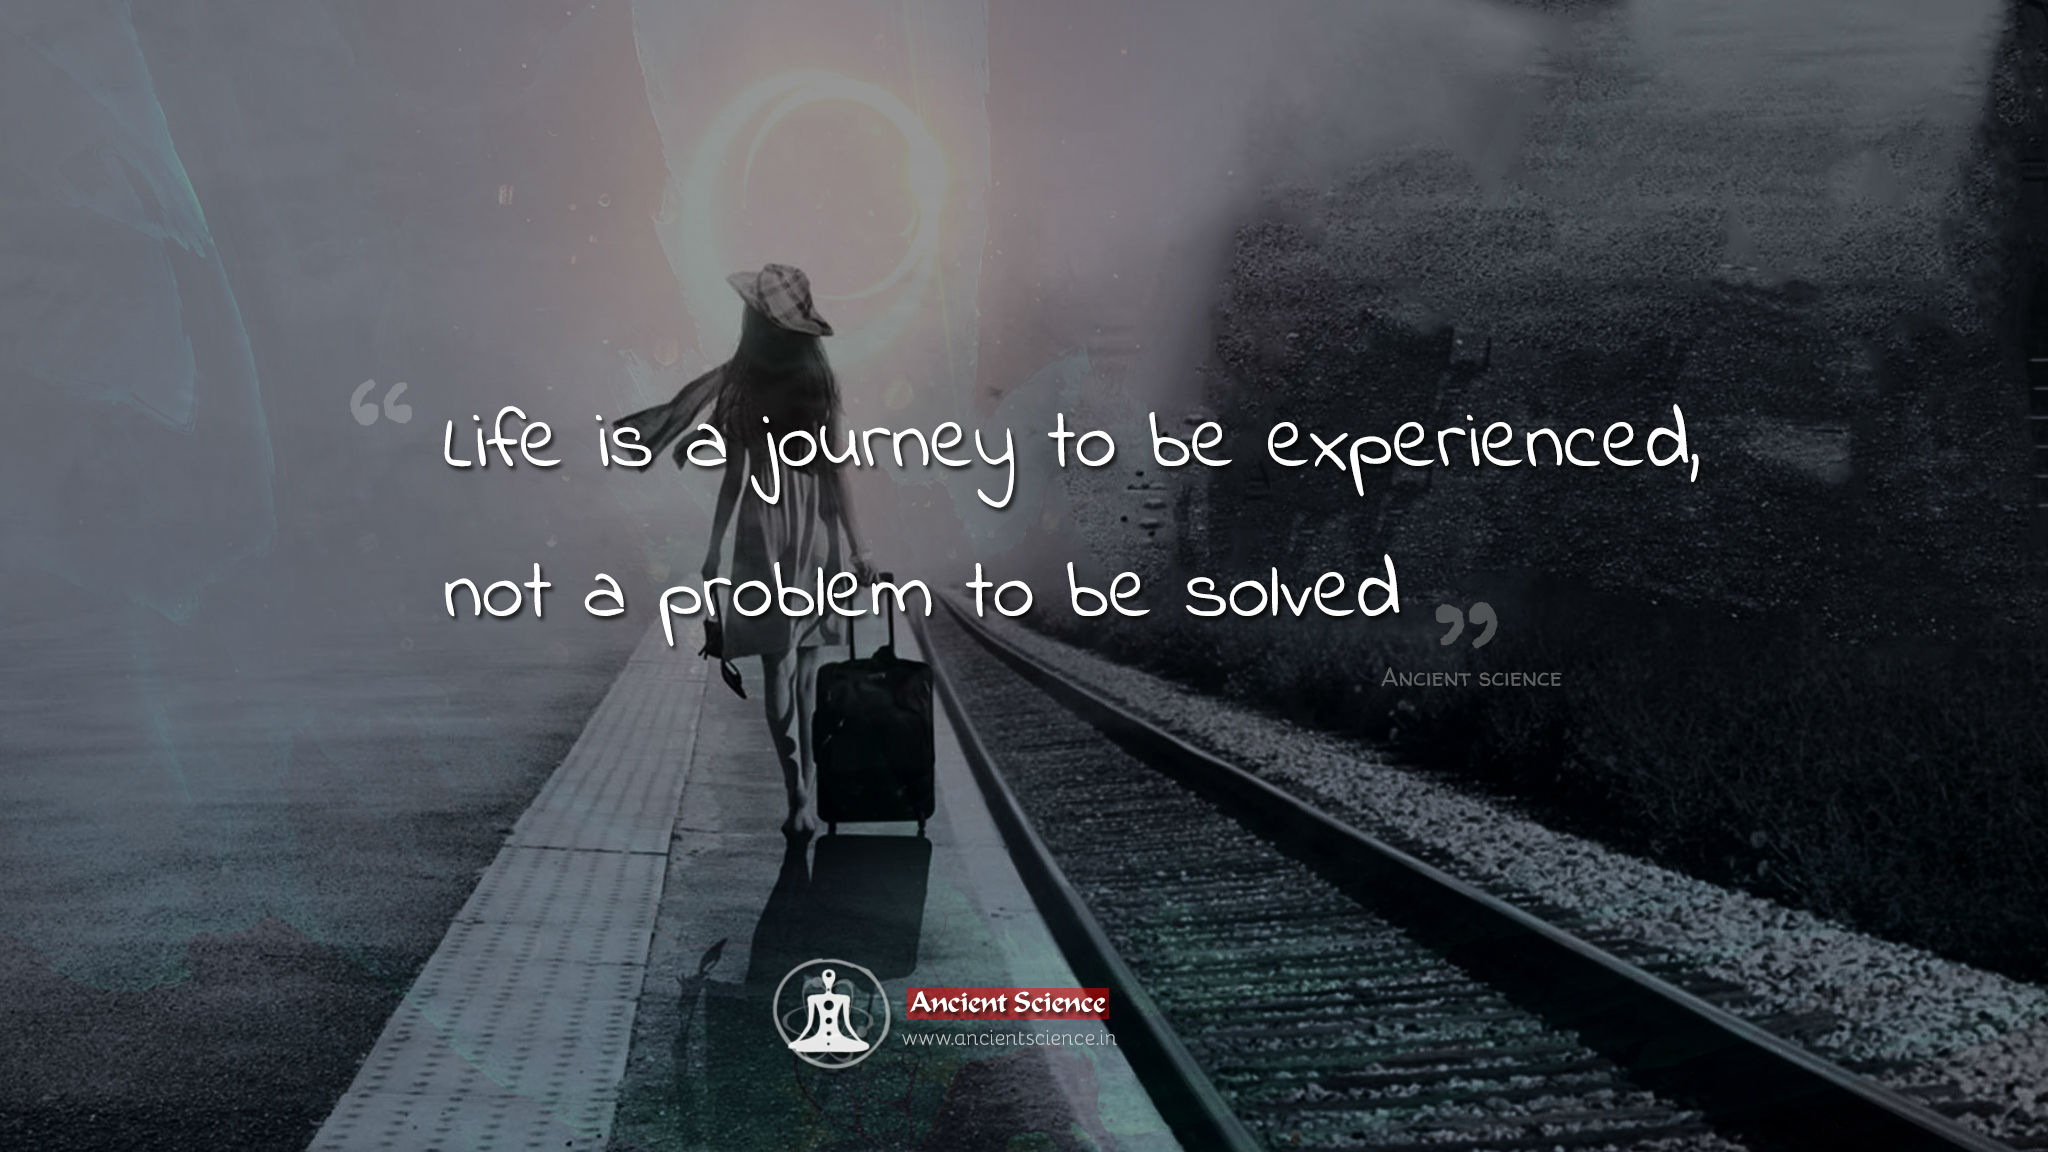 Life is a journey to be experienced not a problem to be solved